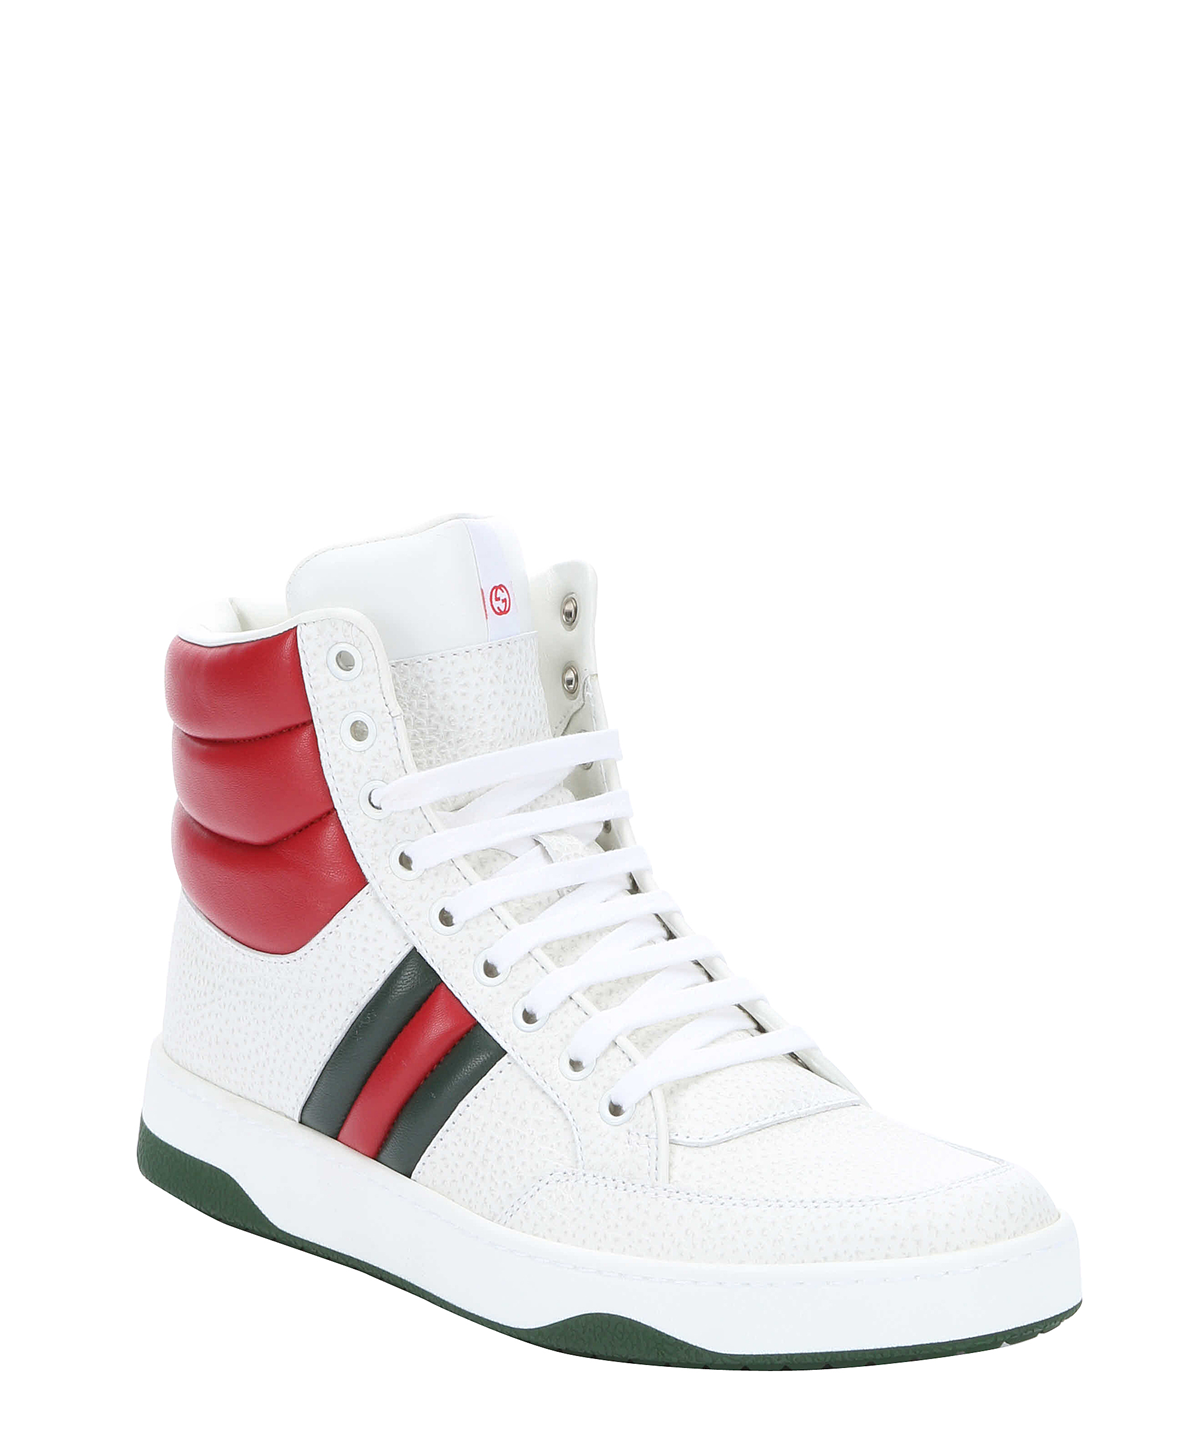 gucci shoes white and red